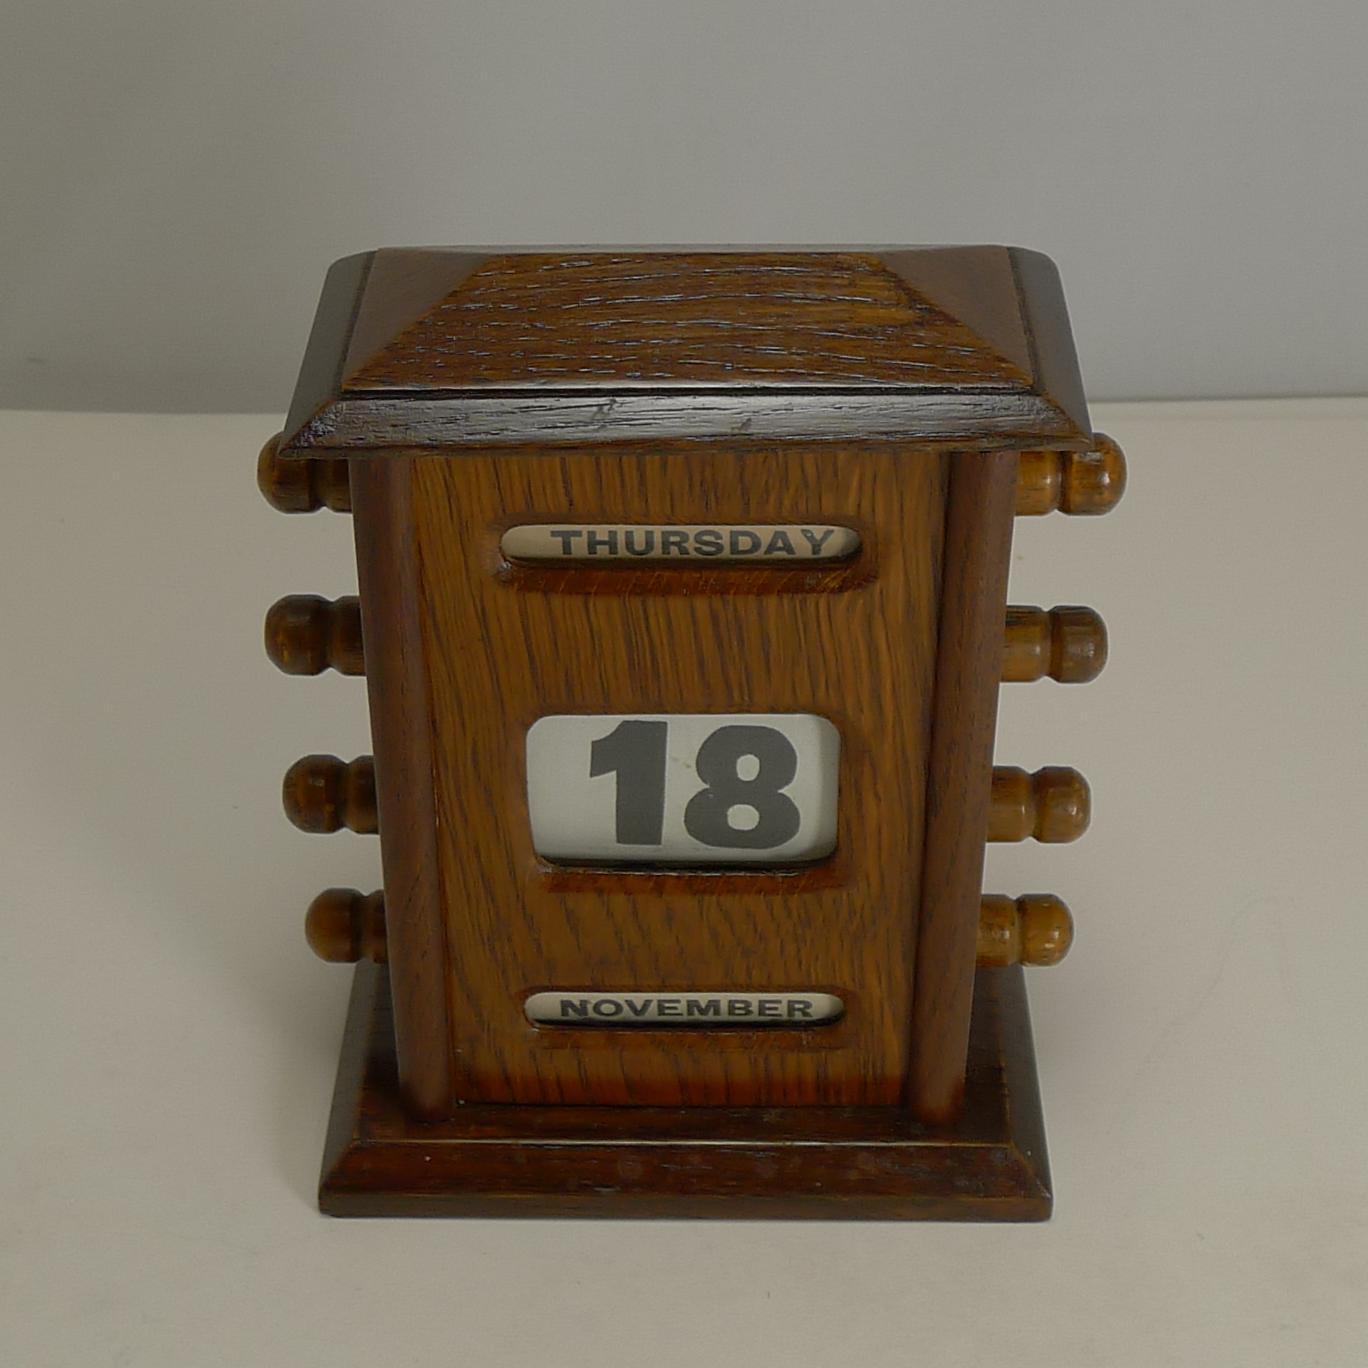 A lovely little desk-top calendar made from solid English oak.

There are knobs either side to move forward and return the rollers to enable the day date and month to be changed.

Edwardian in era dating to circa 1900-1910. Excellent working